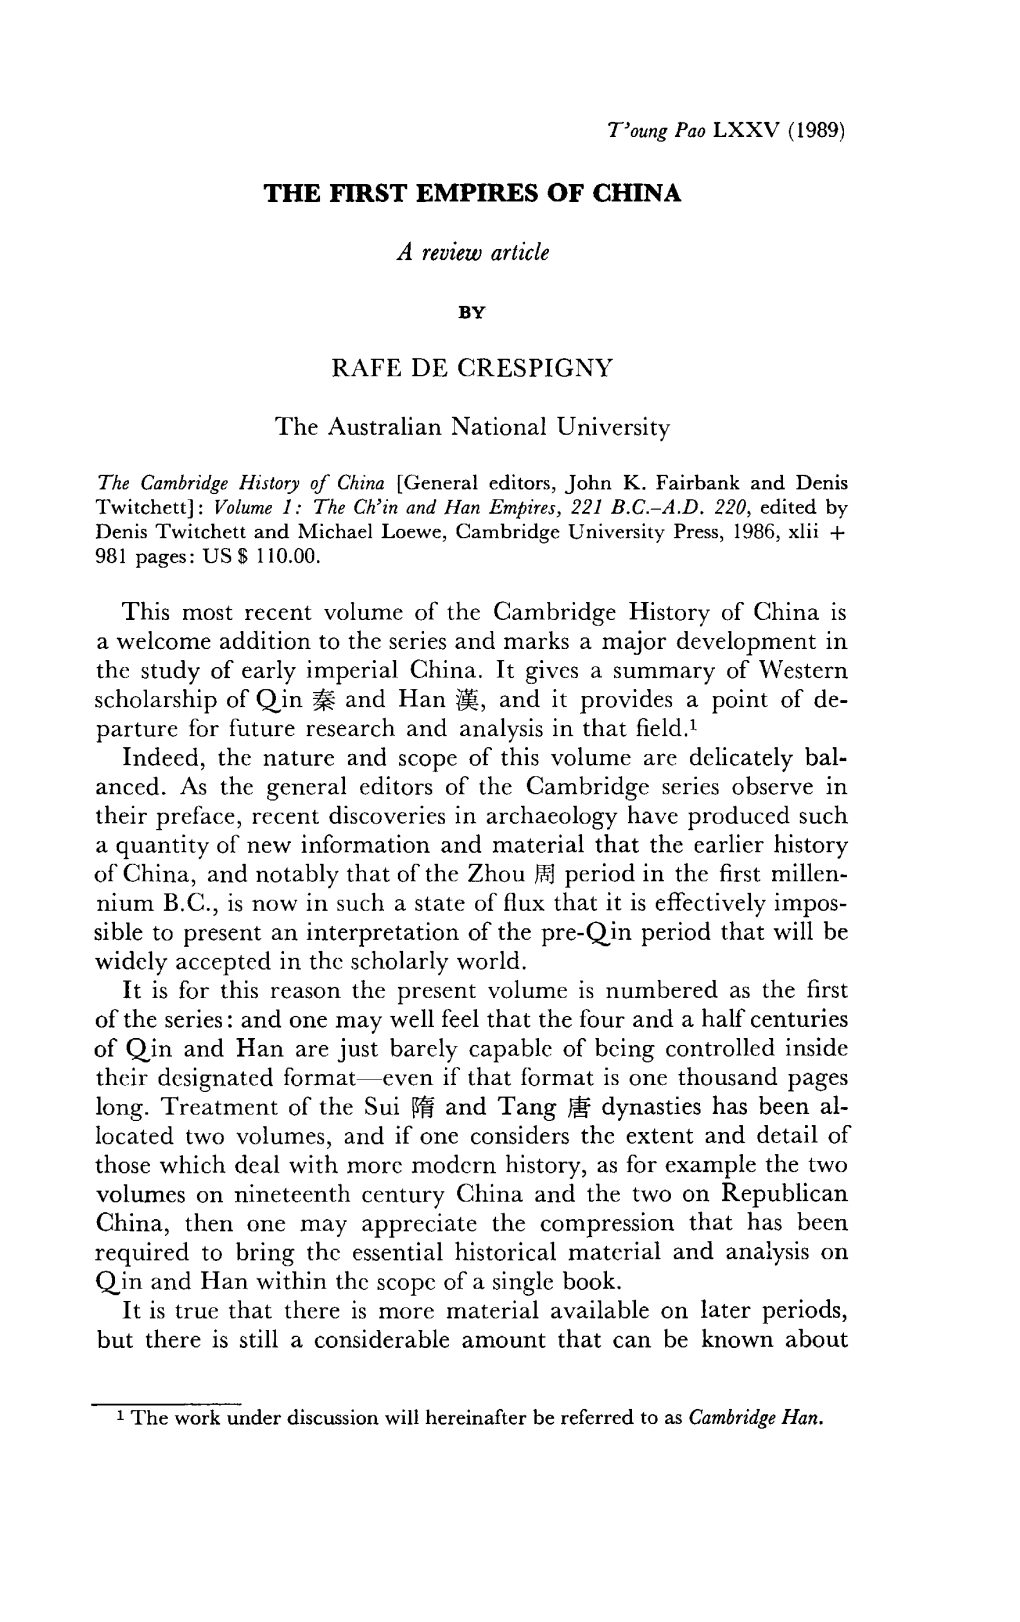 THE FIRST EMPIRES of CHINA a Review Article by RAFE DE